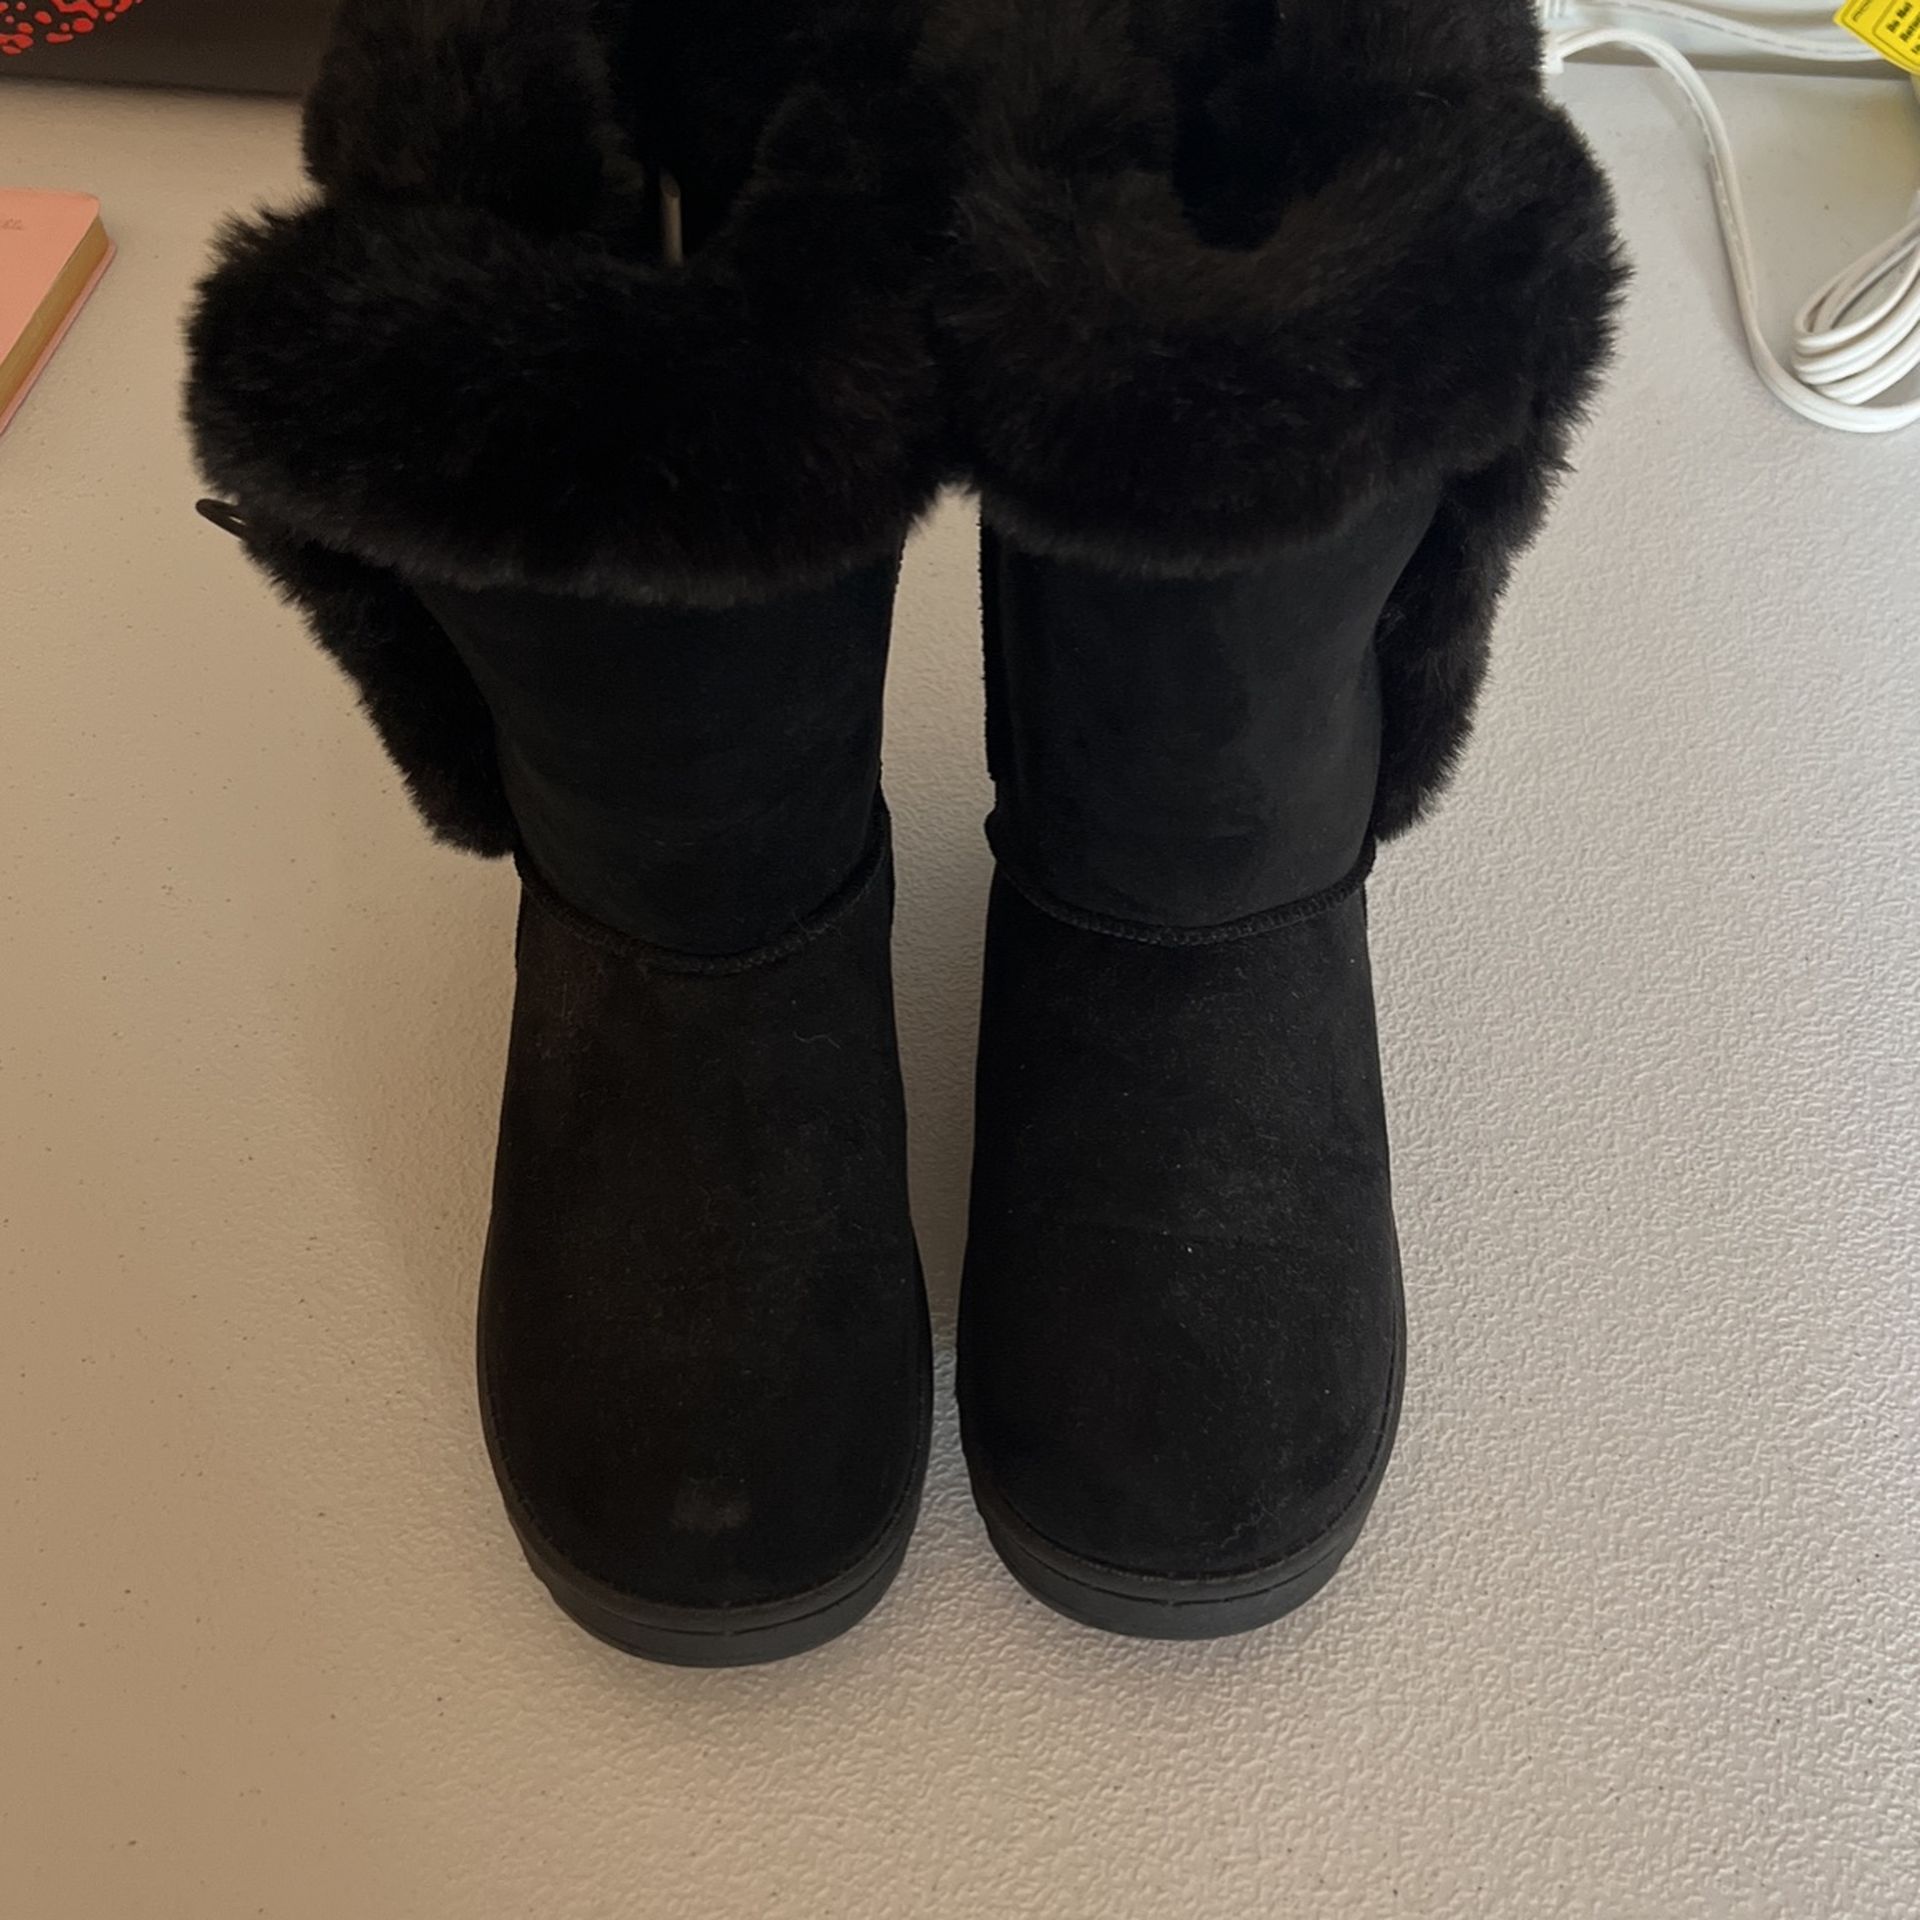 Snow Boots Size 6.5 Woman’s 